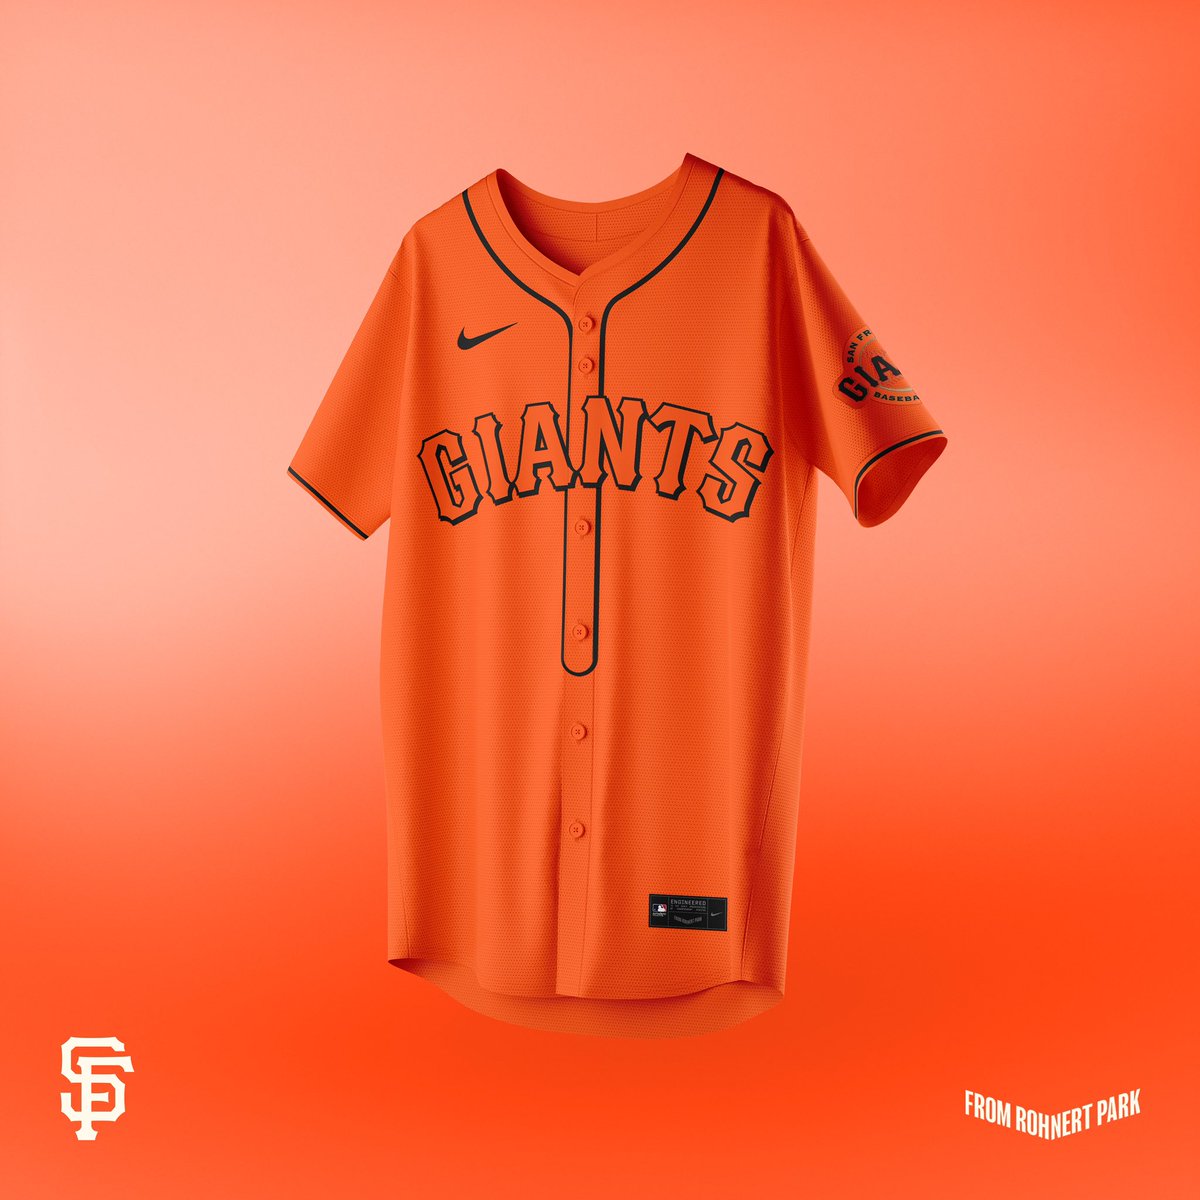 A jersey design for every @SFGiants win 🧡 SF 8 - 4 PHI ⚾️ #NothingLikeIt